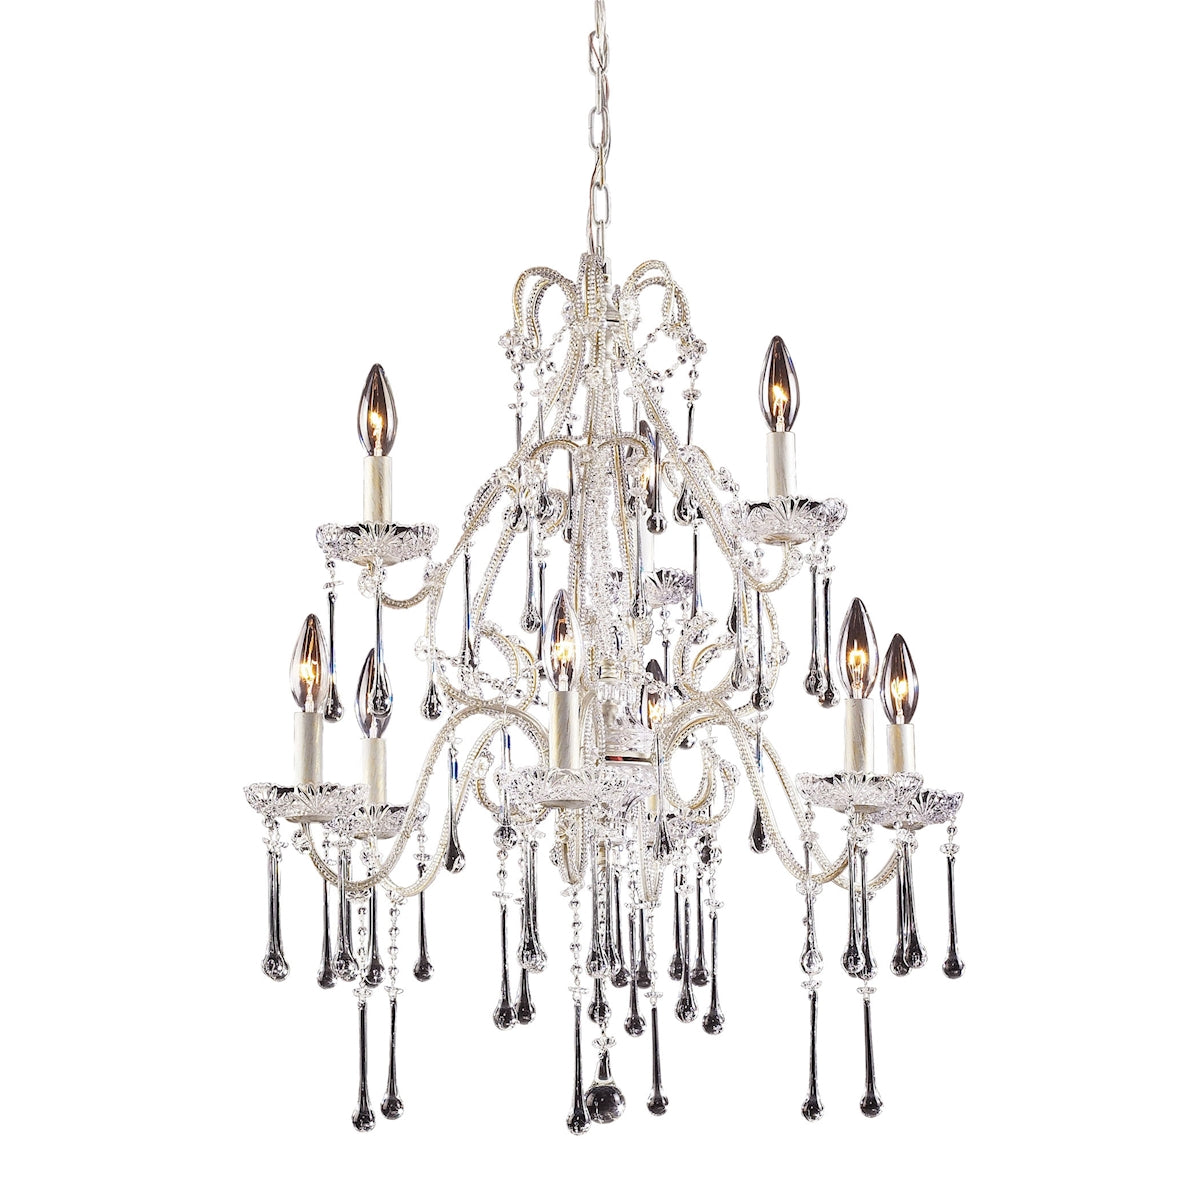 ELK Lighting 4003/6+3CL Opulence 9-Light Chandelier in Antique White with Clear Crystals